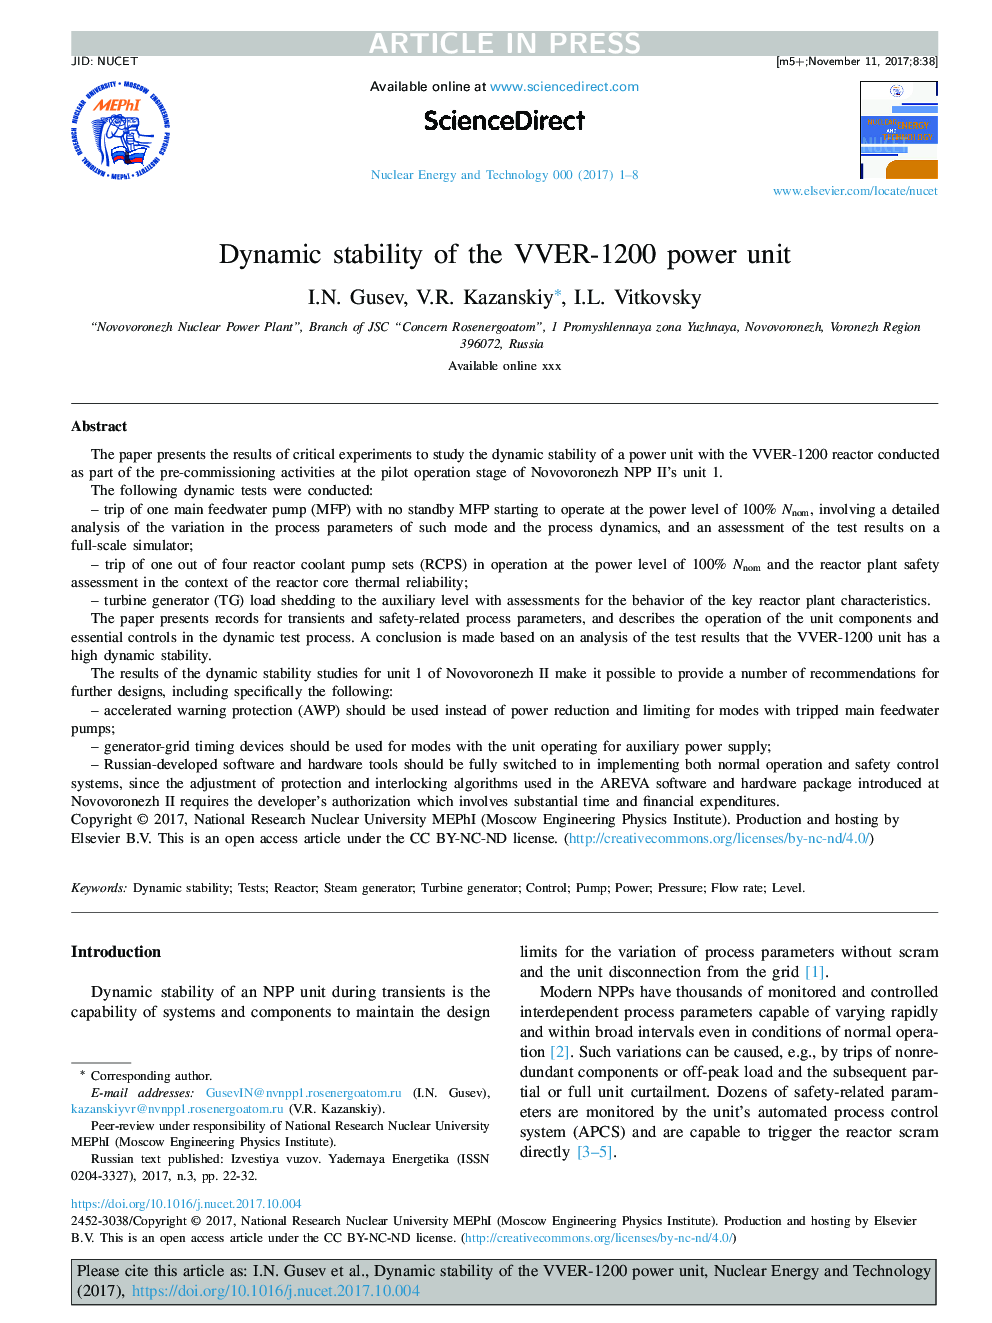 Dynamic stability of the VVER-1200 power unit